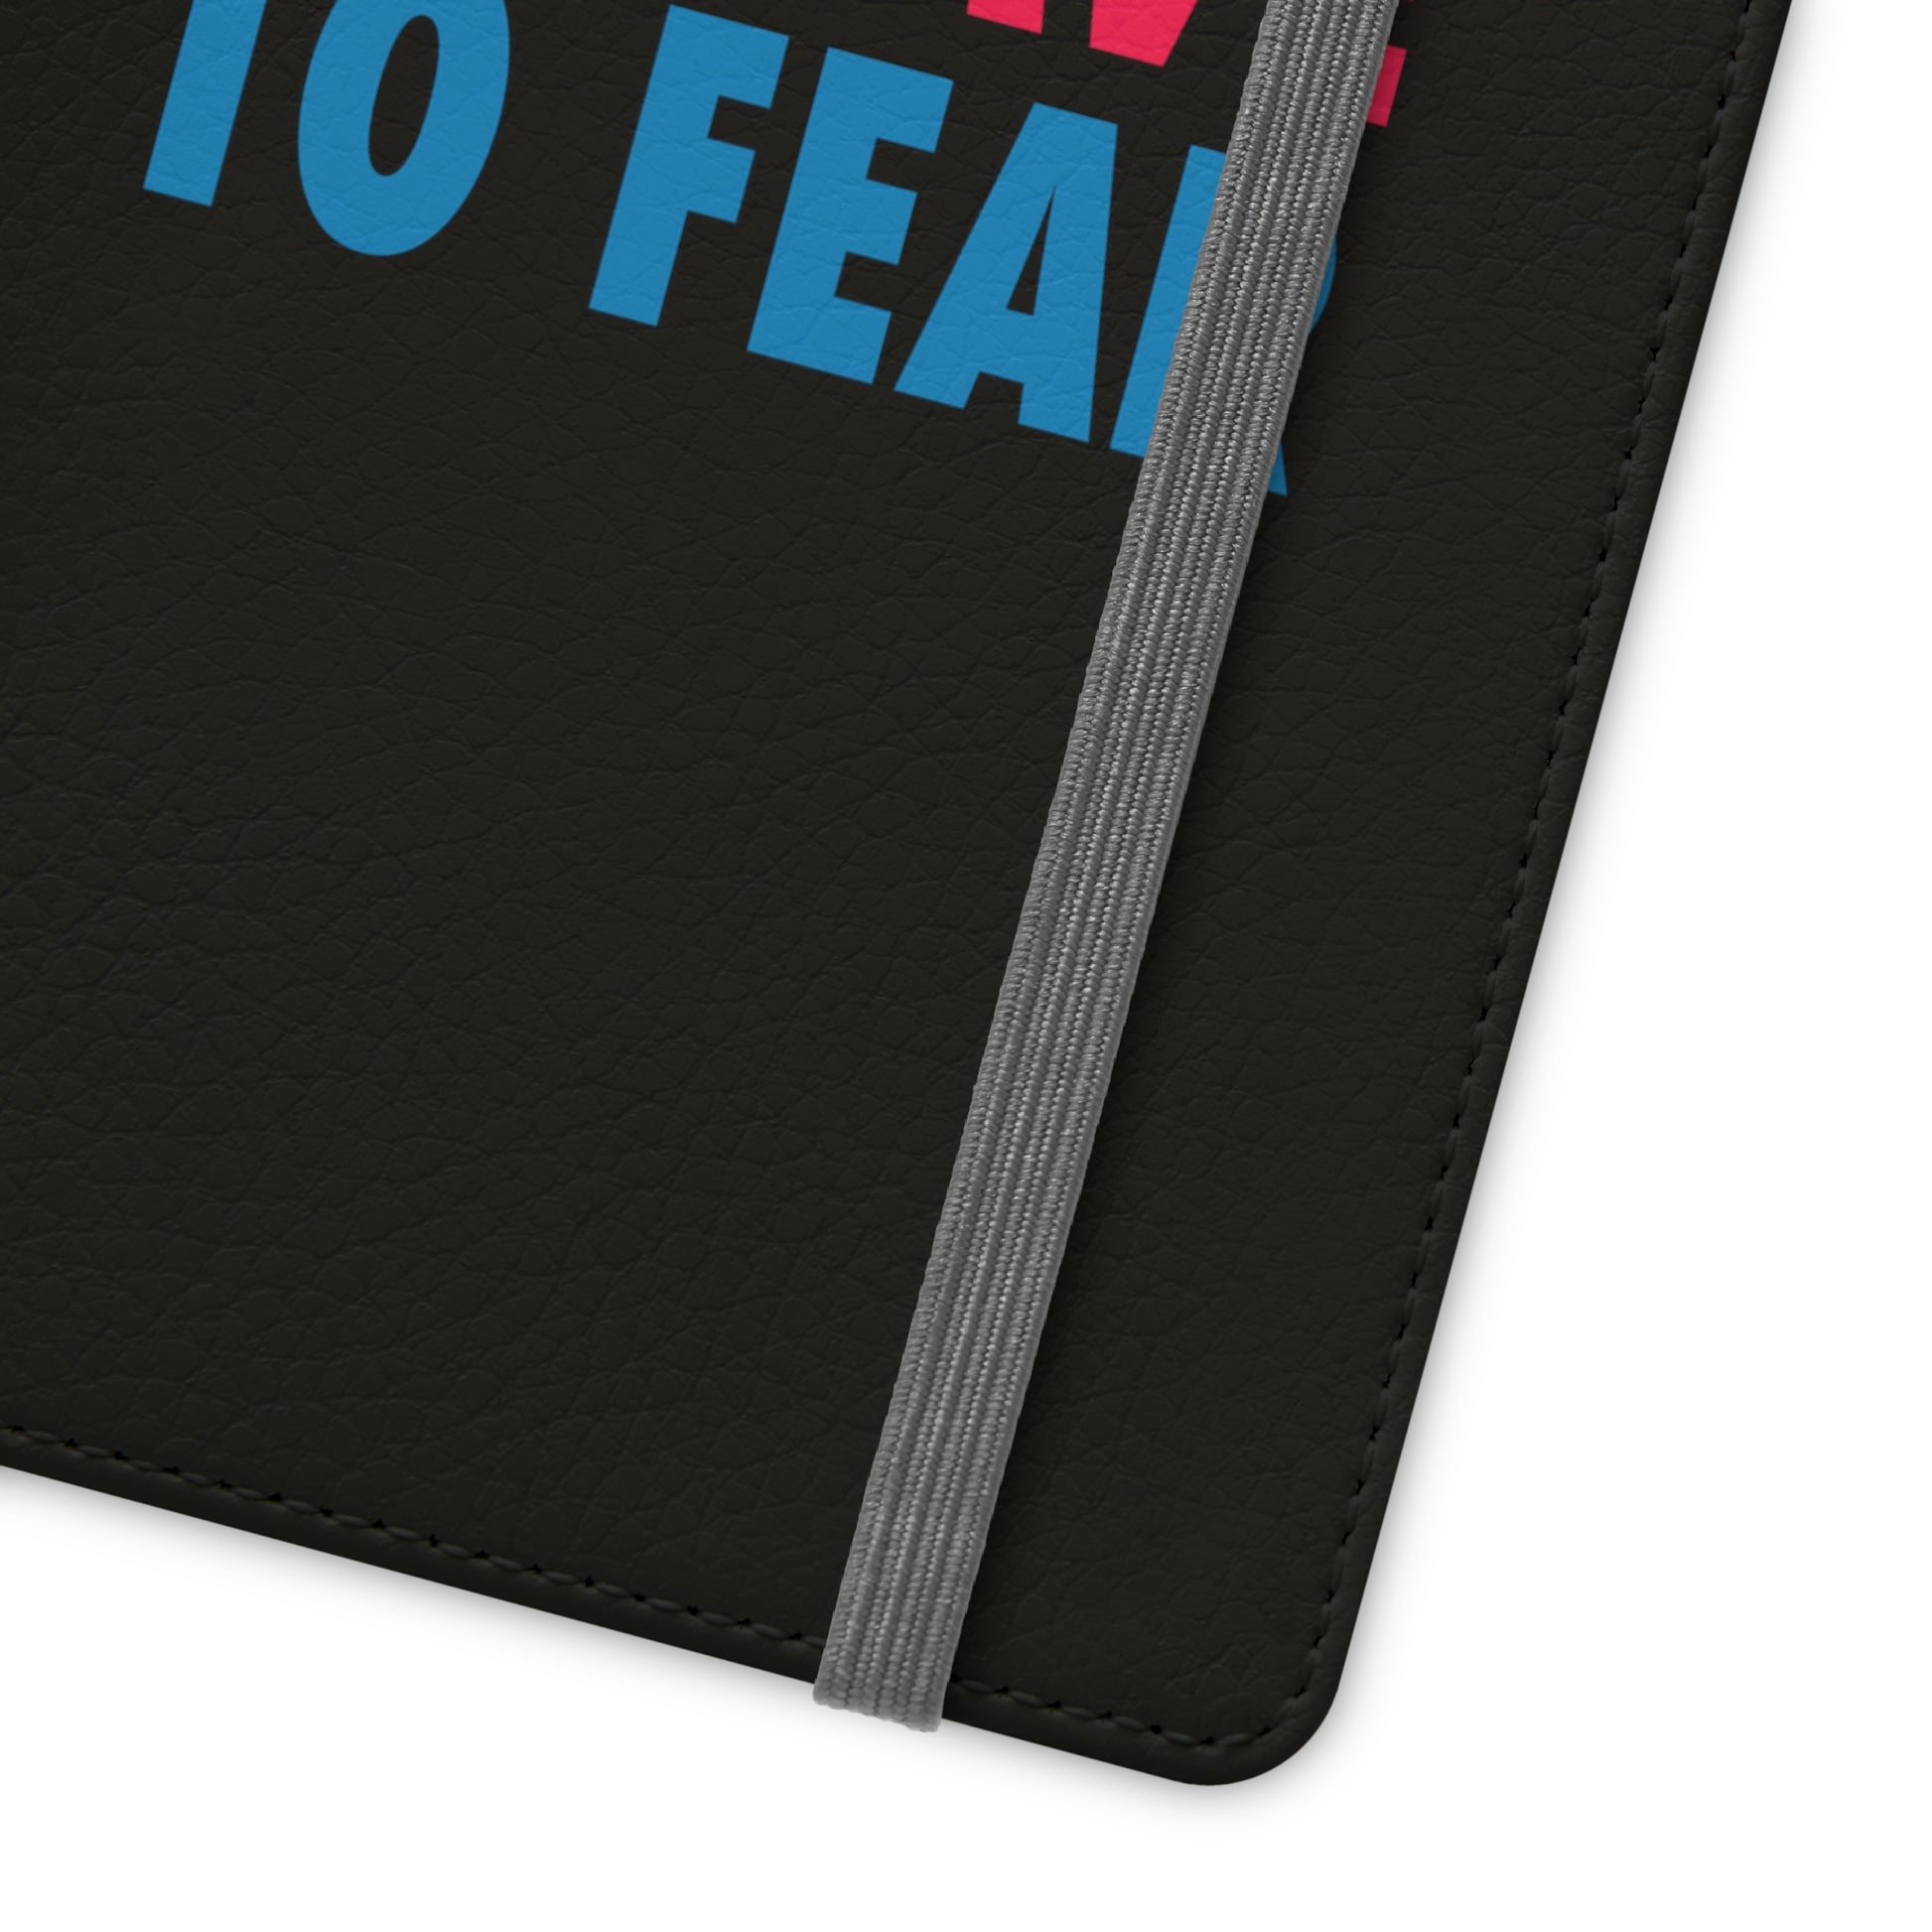 Child Of God No Longer A Slave To Fear Christian Phone Flip Cases Printify